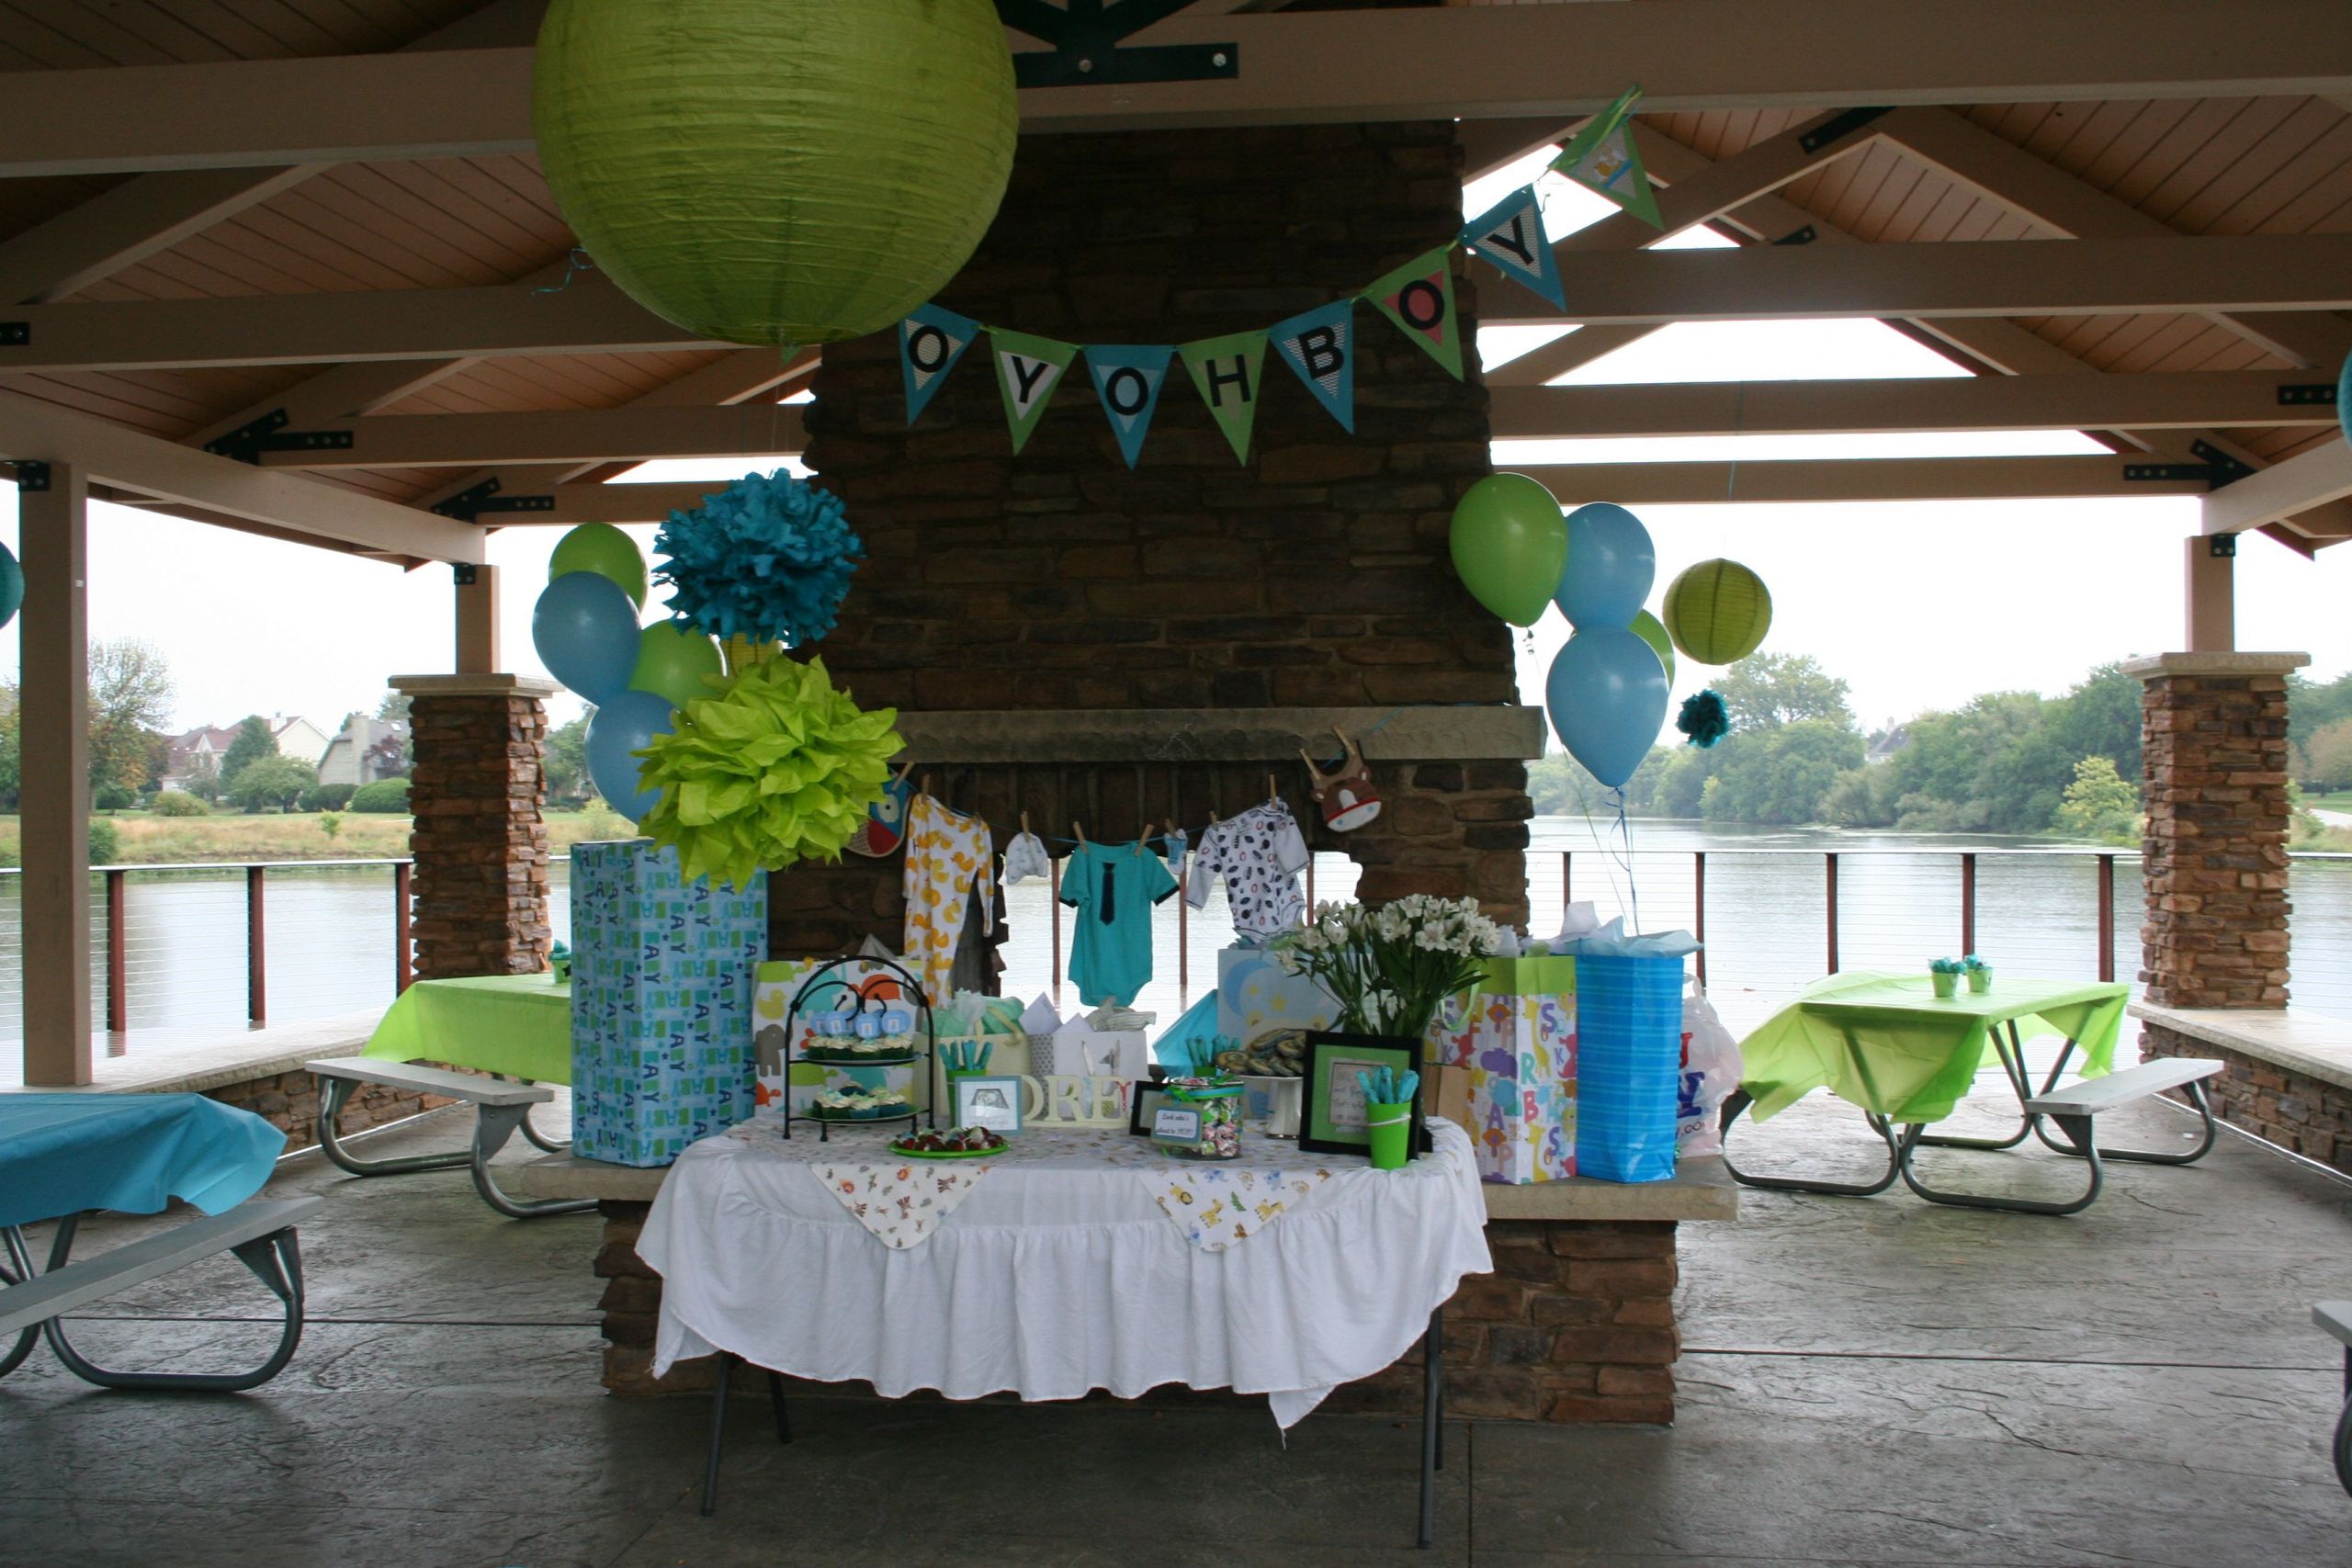 Outdoor Baby Shower Decorating Ideas
 I like the cute decorations and the splash of a few diff